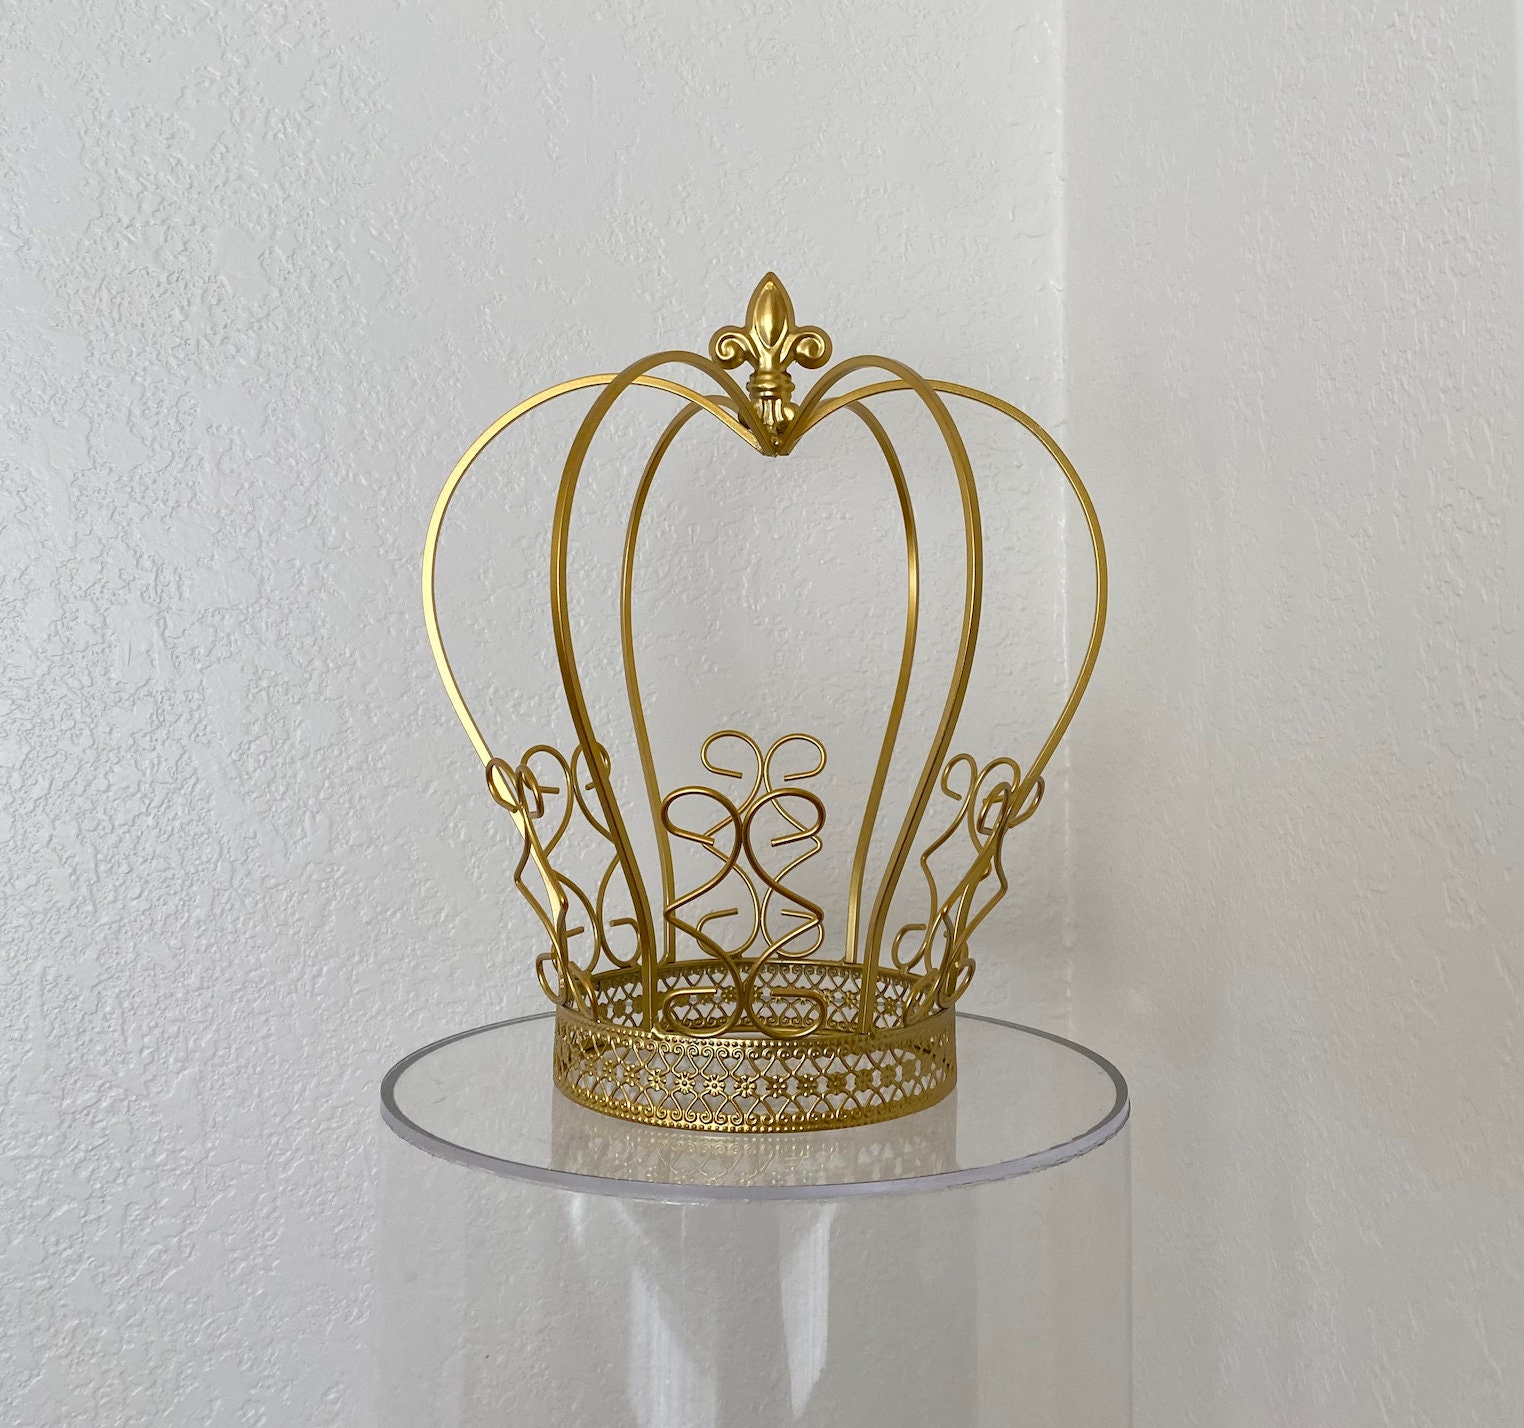  27 PCS Gold Crown Cake Topper Mini Crown Crowns for Flower  Bouquets Glittering Metal Queen Crown for Girls Lady Bridal Wedding Vintage  Cake Decoration for Baby Shower Birthday Party 3 Colors 